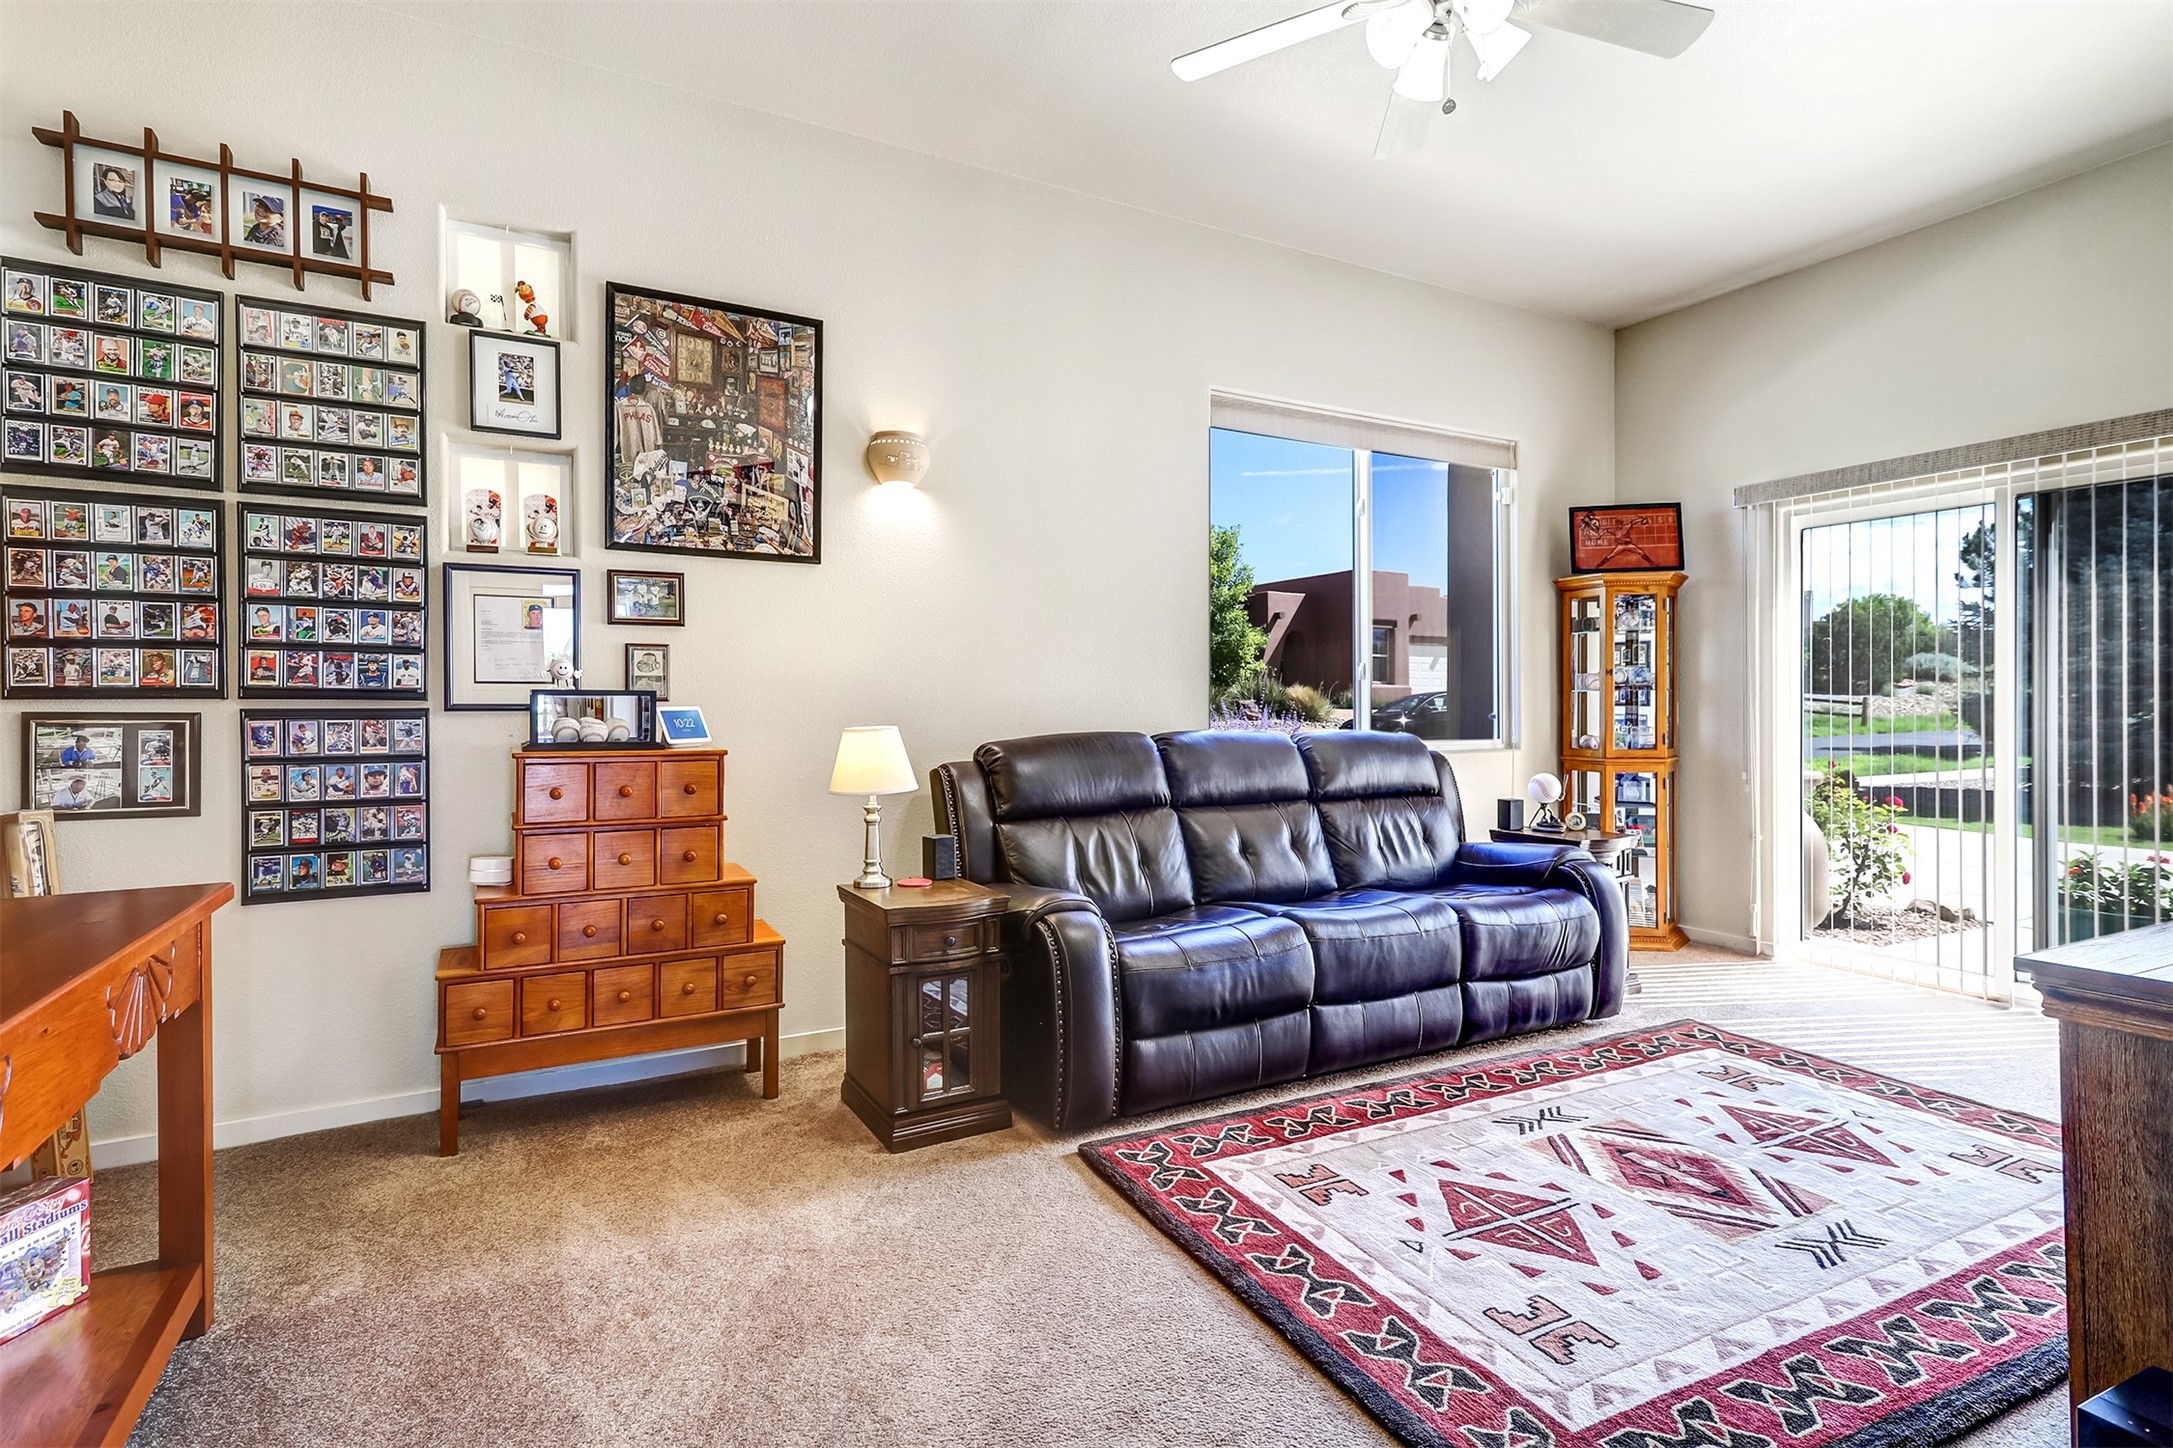 Bonus Room can be a 4th Bedroom, home office with separate entry or hobby room.